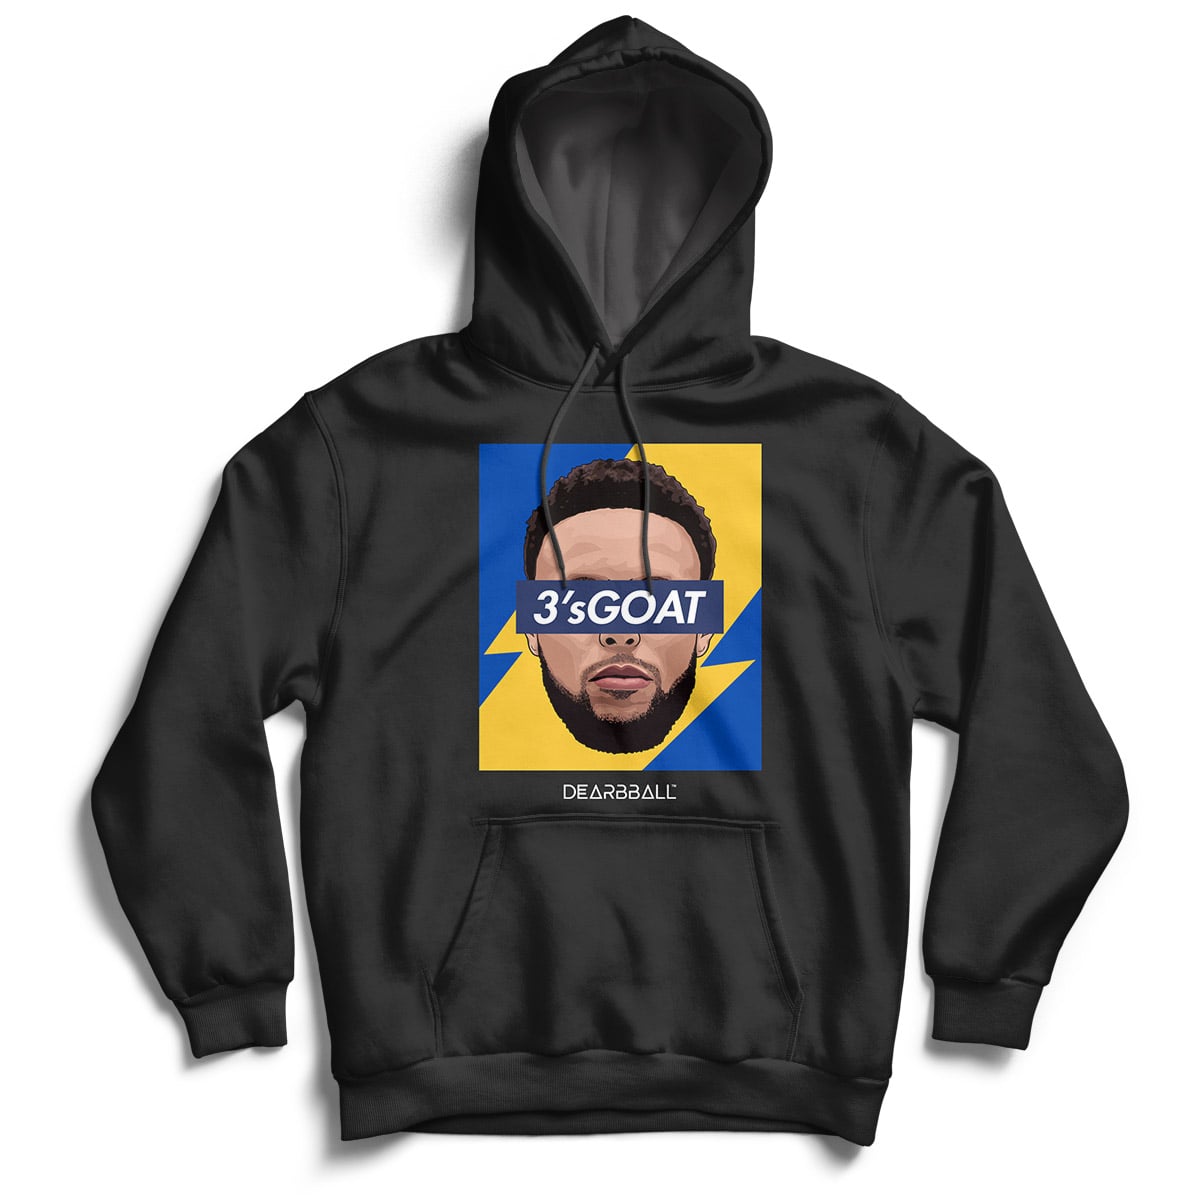 DEARBBALL HOODIE STEPHEN CURRY - 3`sGOAT ECLAIR VINTAGE SUPREMACY